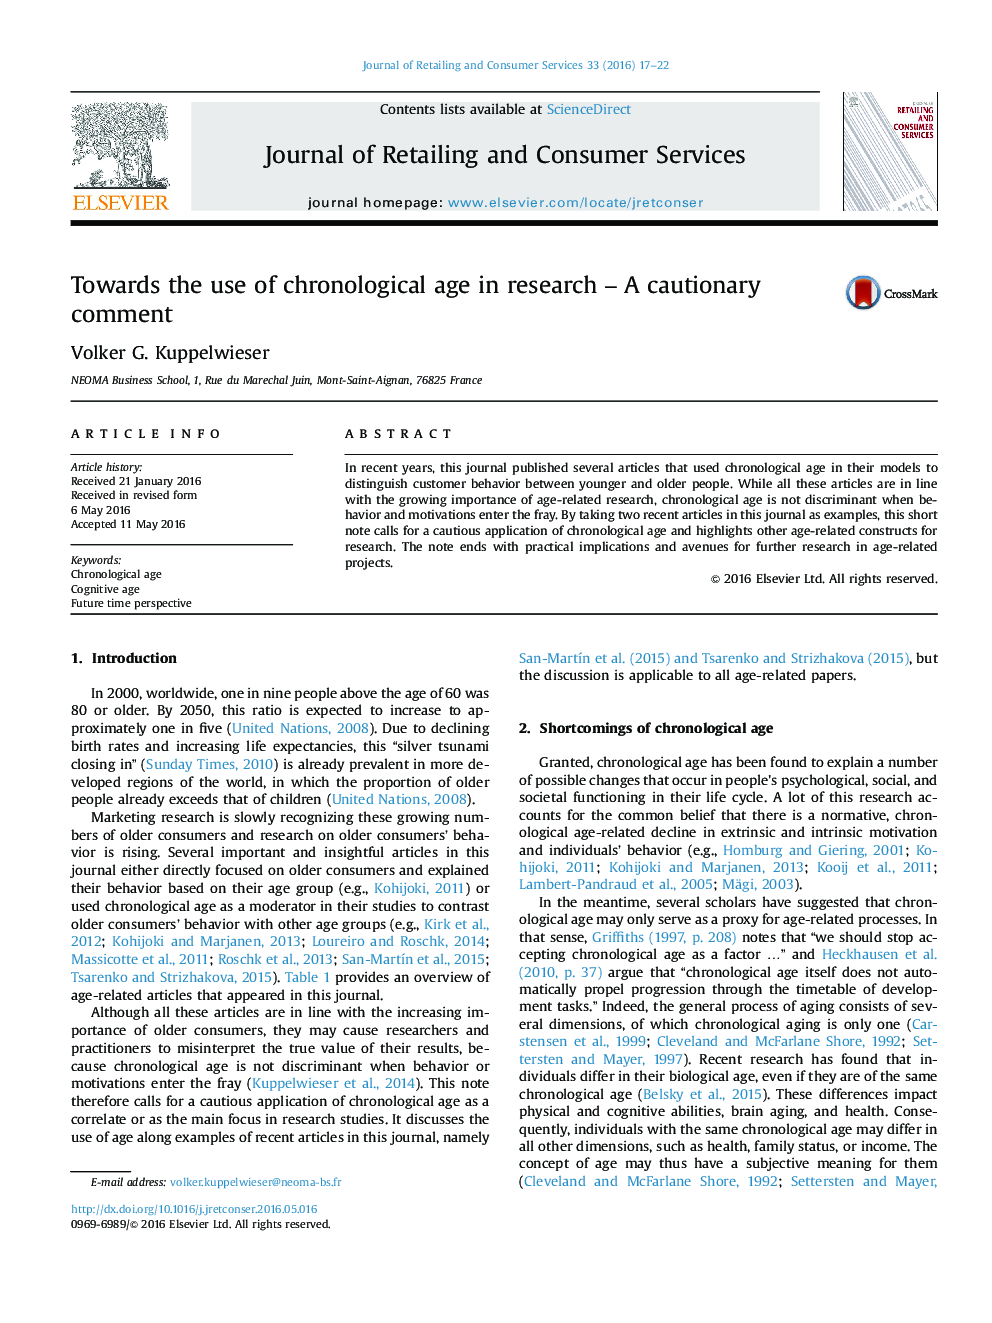 Towards the use of chronological age in research – A cautionary comment